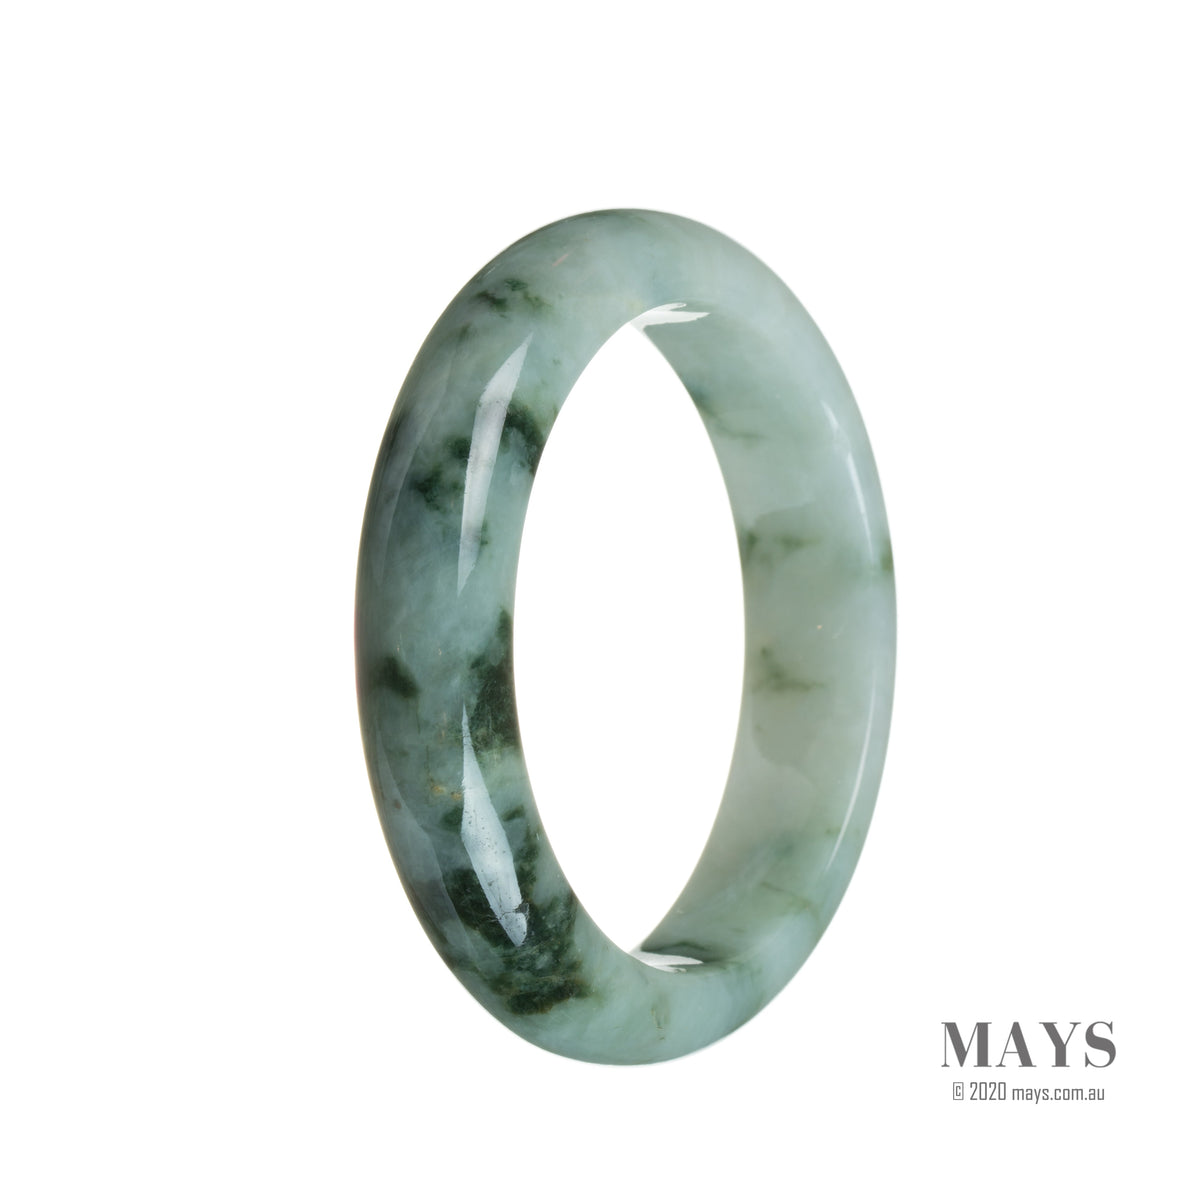 A pale green, untreated jade bracelet with a traditional pattern. It measures 55mm in size and has a semi-round shape. Manufactured by MAYS.